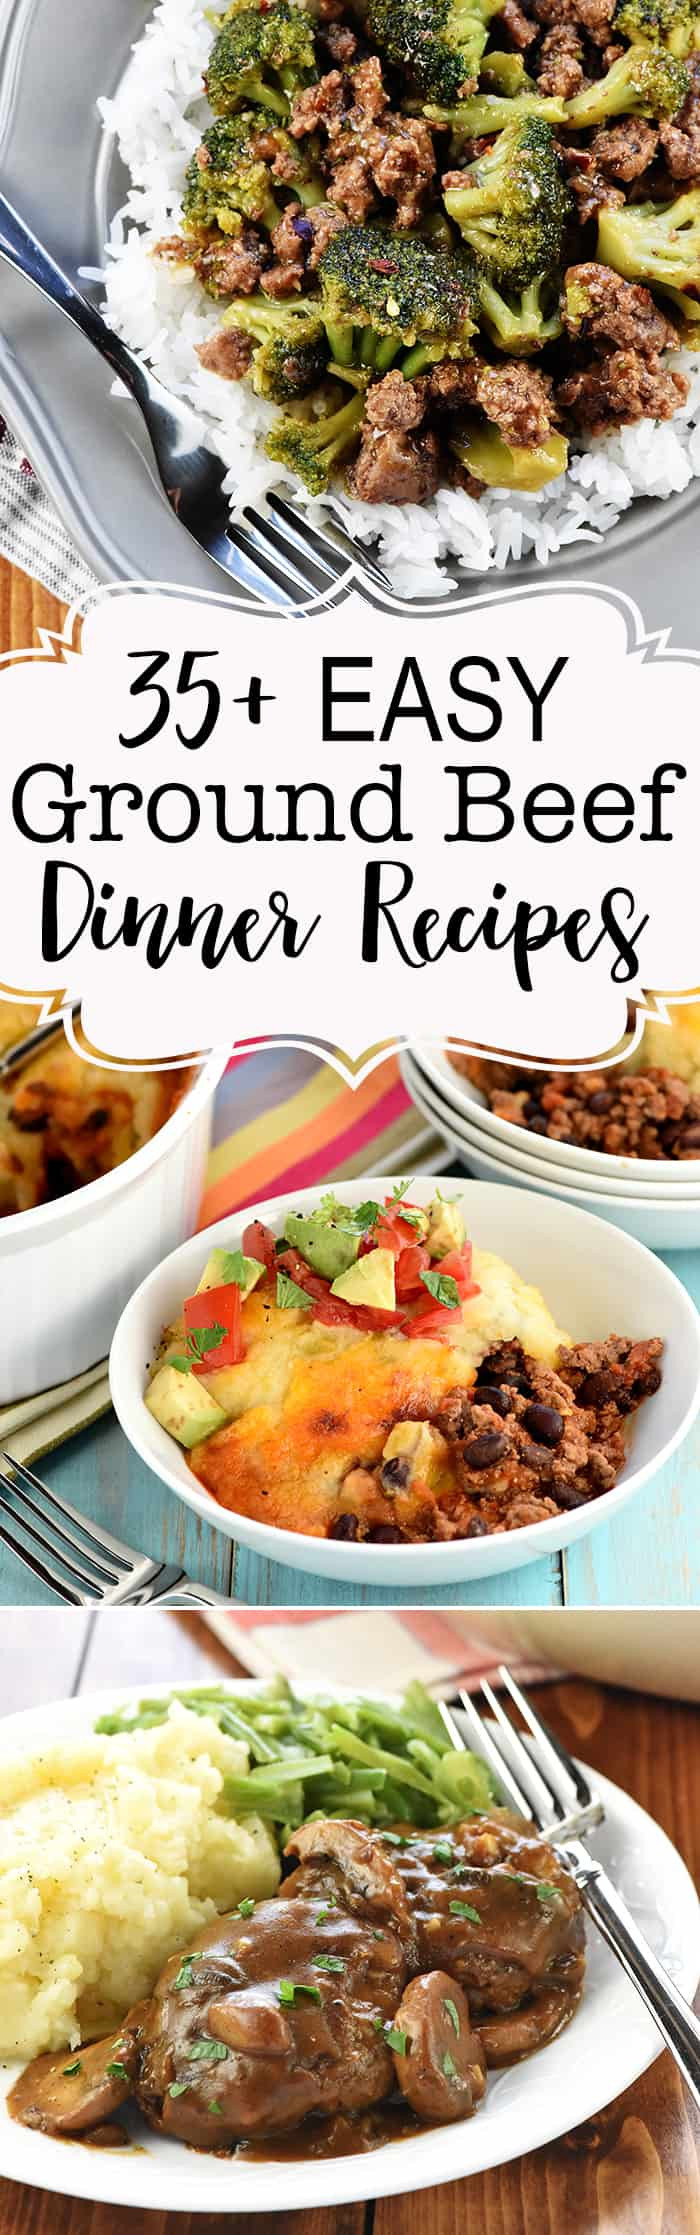 Easy Dinner Ideas With Ground Beef
 Favorite QUICK & EASY Ground Beef Dinner Recipes